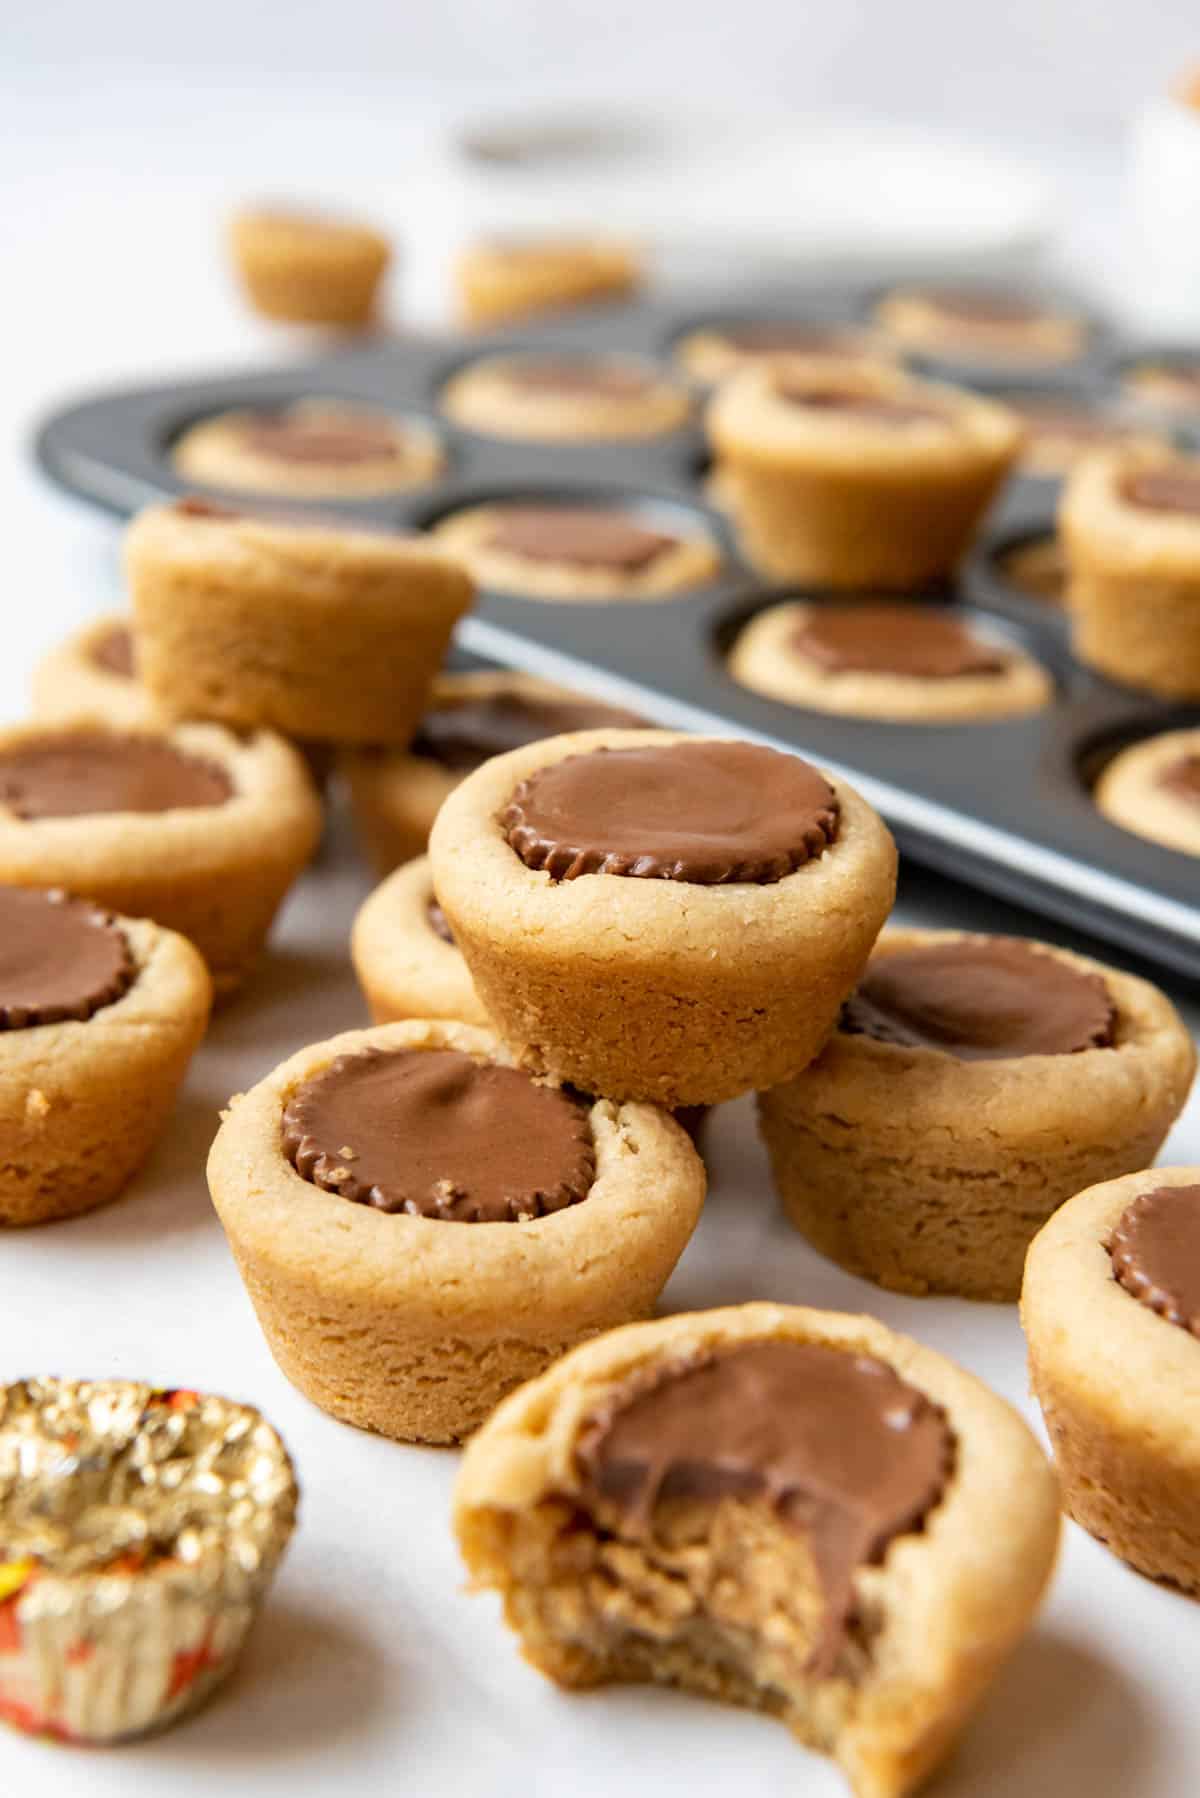 Stacked peanut butter cup cookies with a bite taken out of one of them.